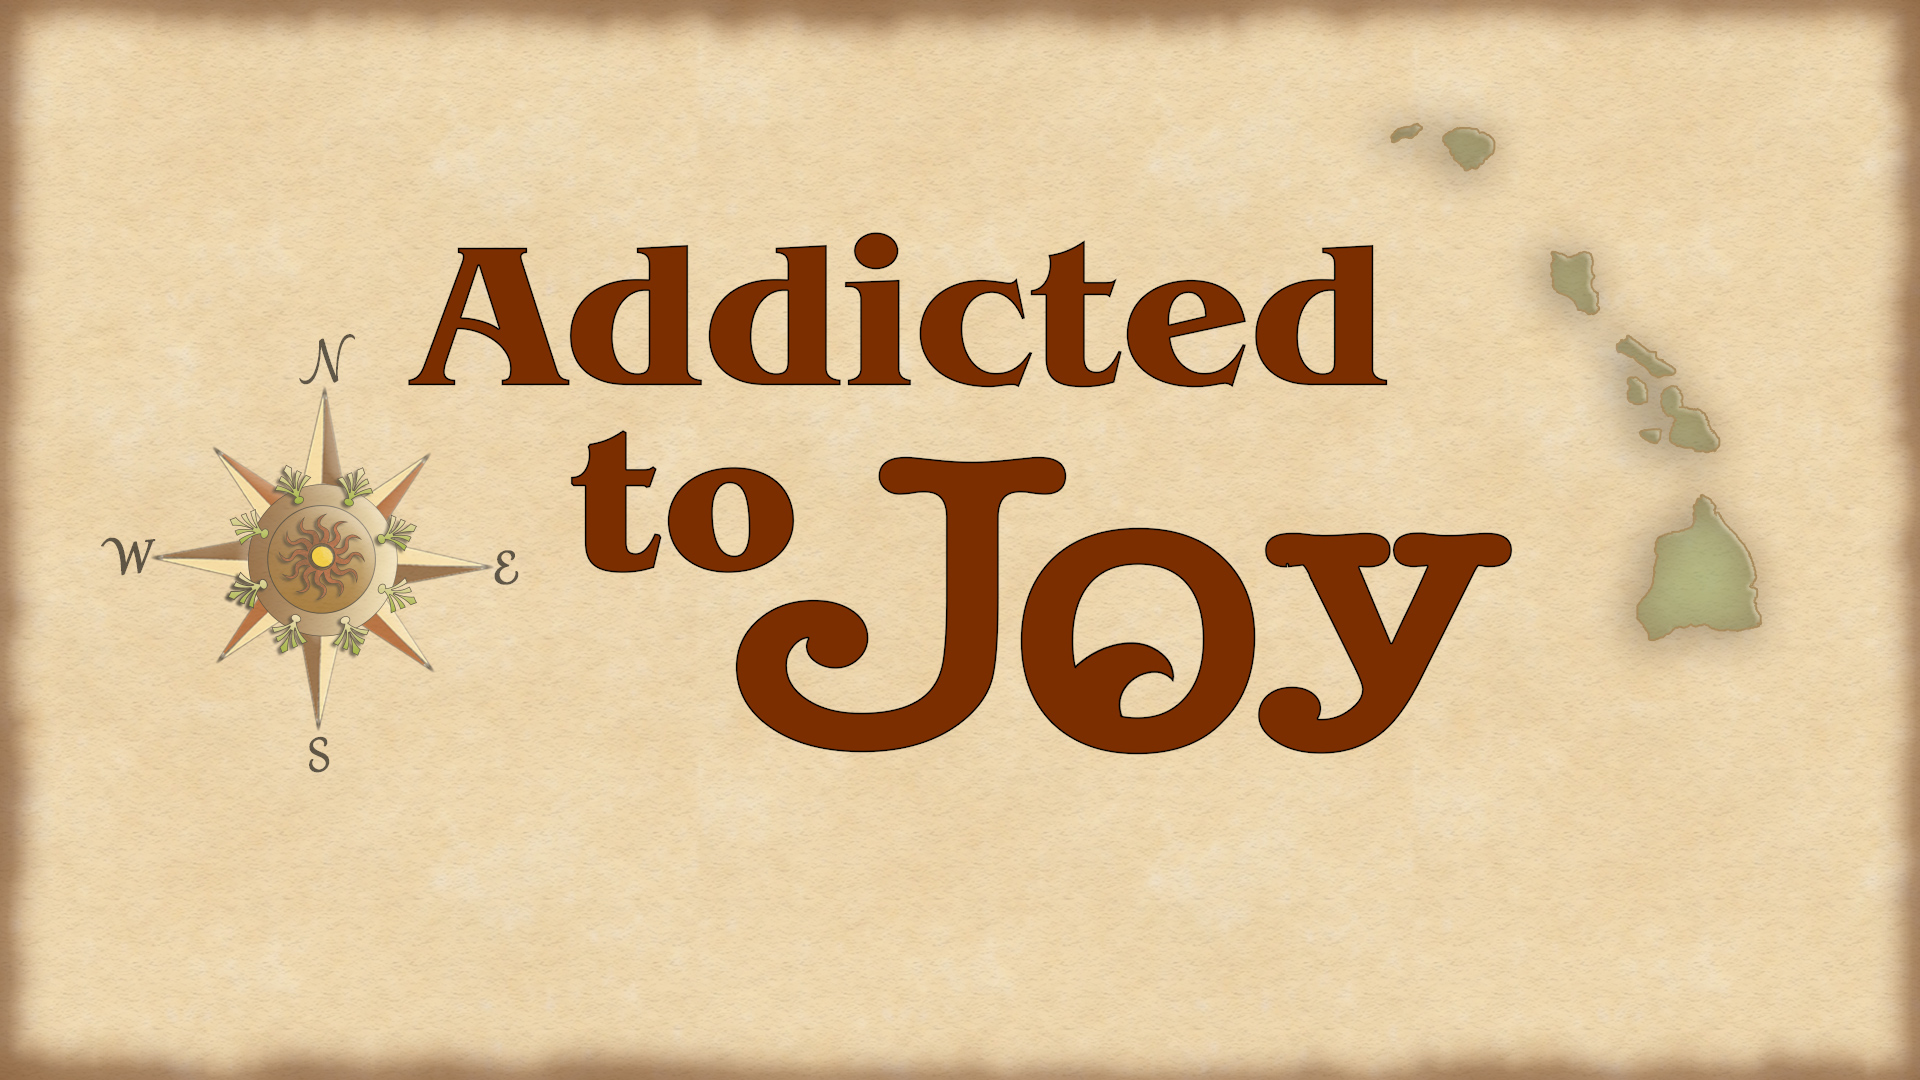 The Premiere Screening of "Addicted to Joy"